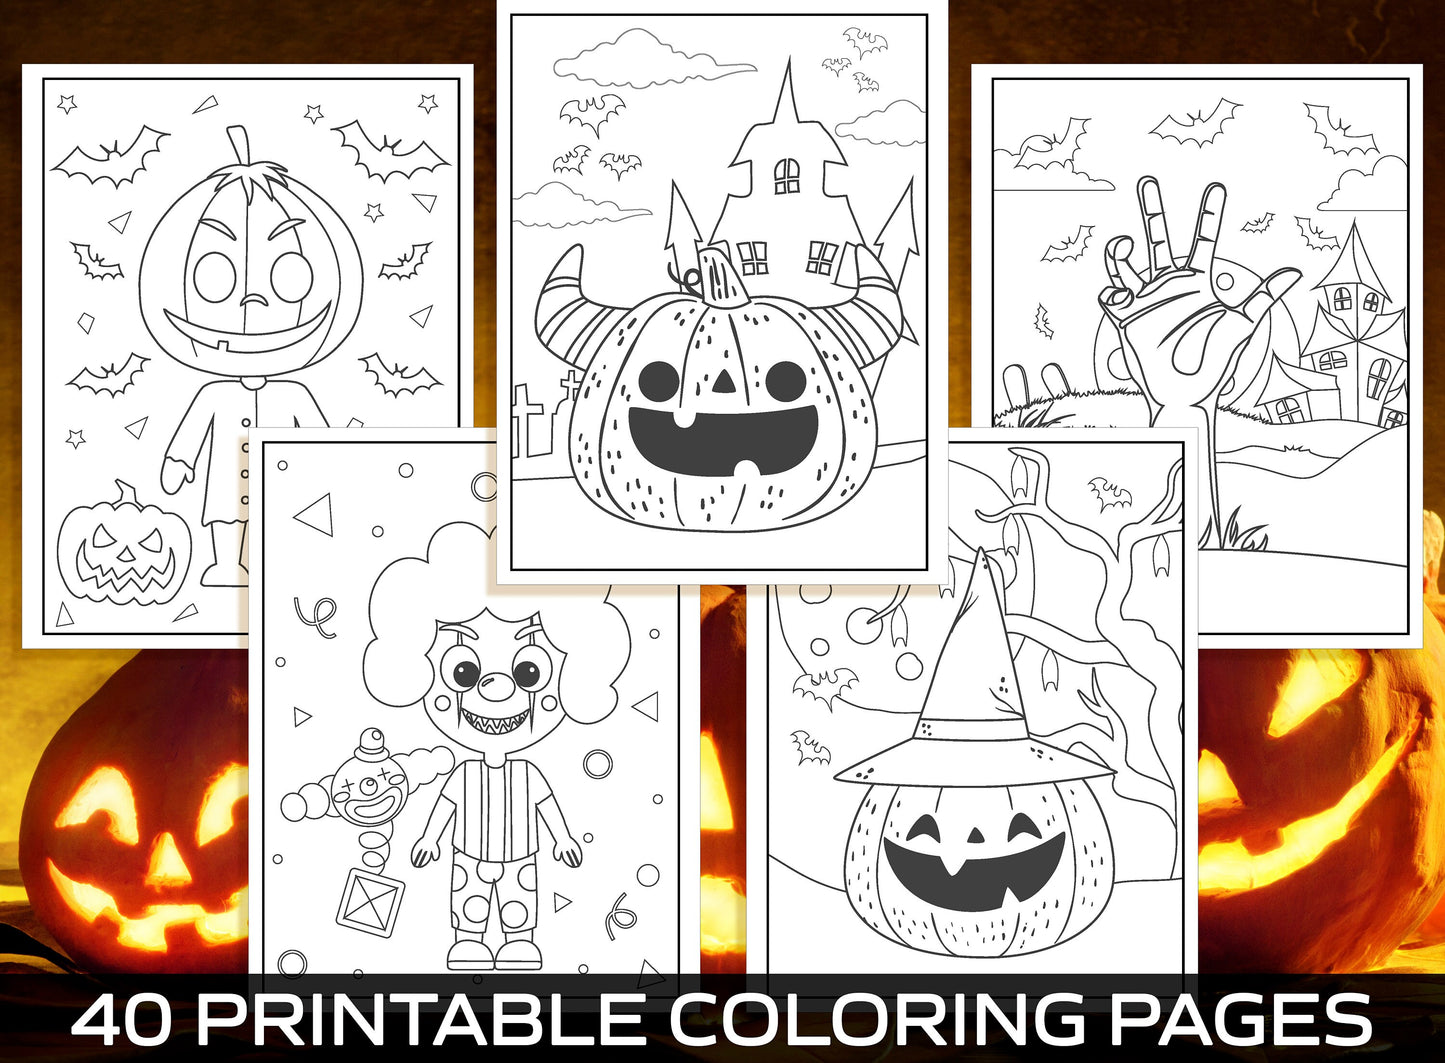 Halloween Activities for Kids, 40 Printable Coloring Pages for Kids, Boys, Girls, Teens. Halloween Party Activity, Kids Coloring Book, PDF